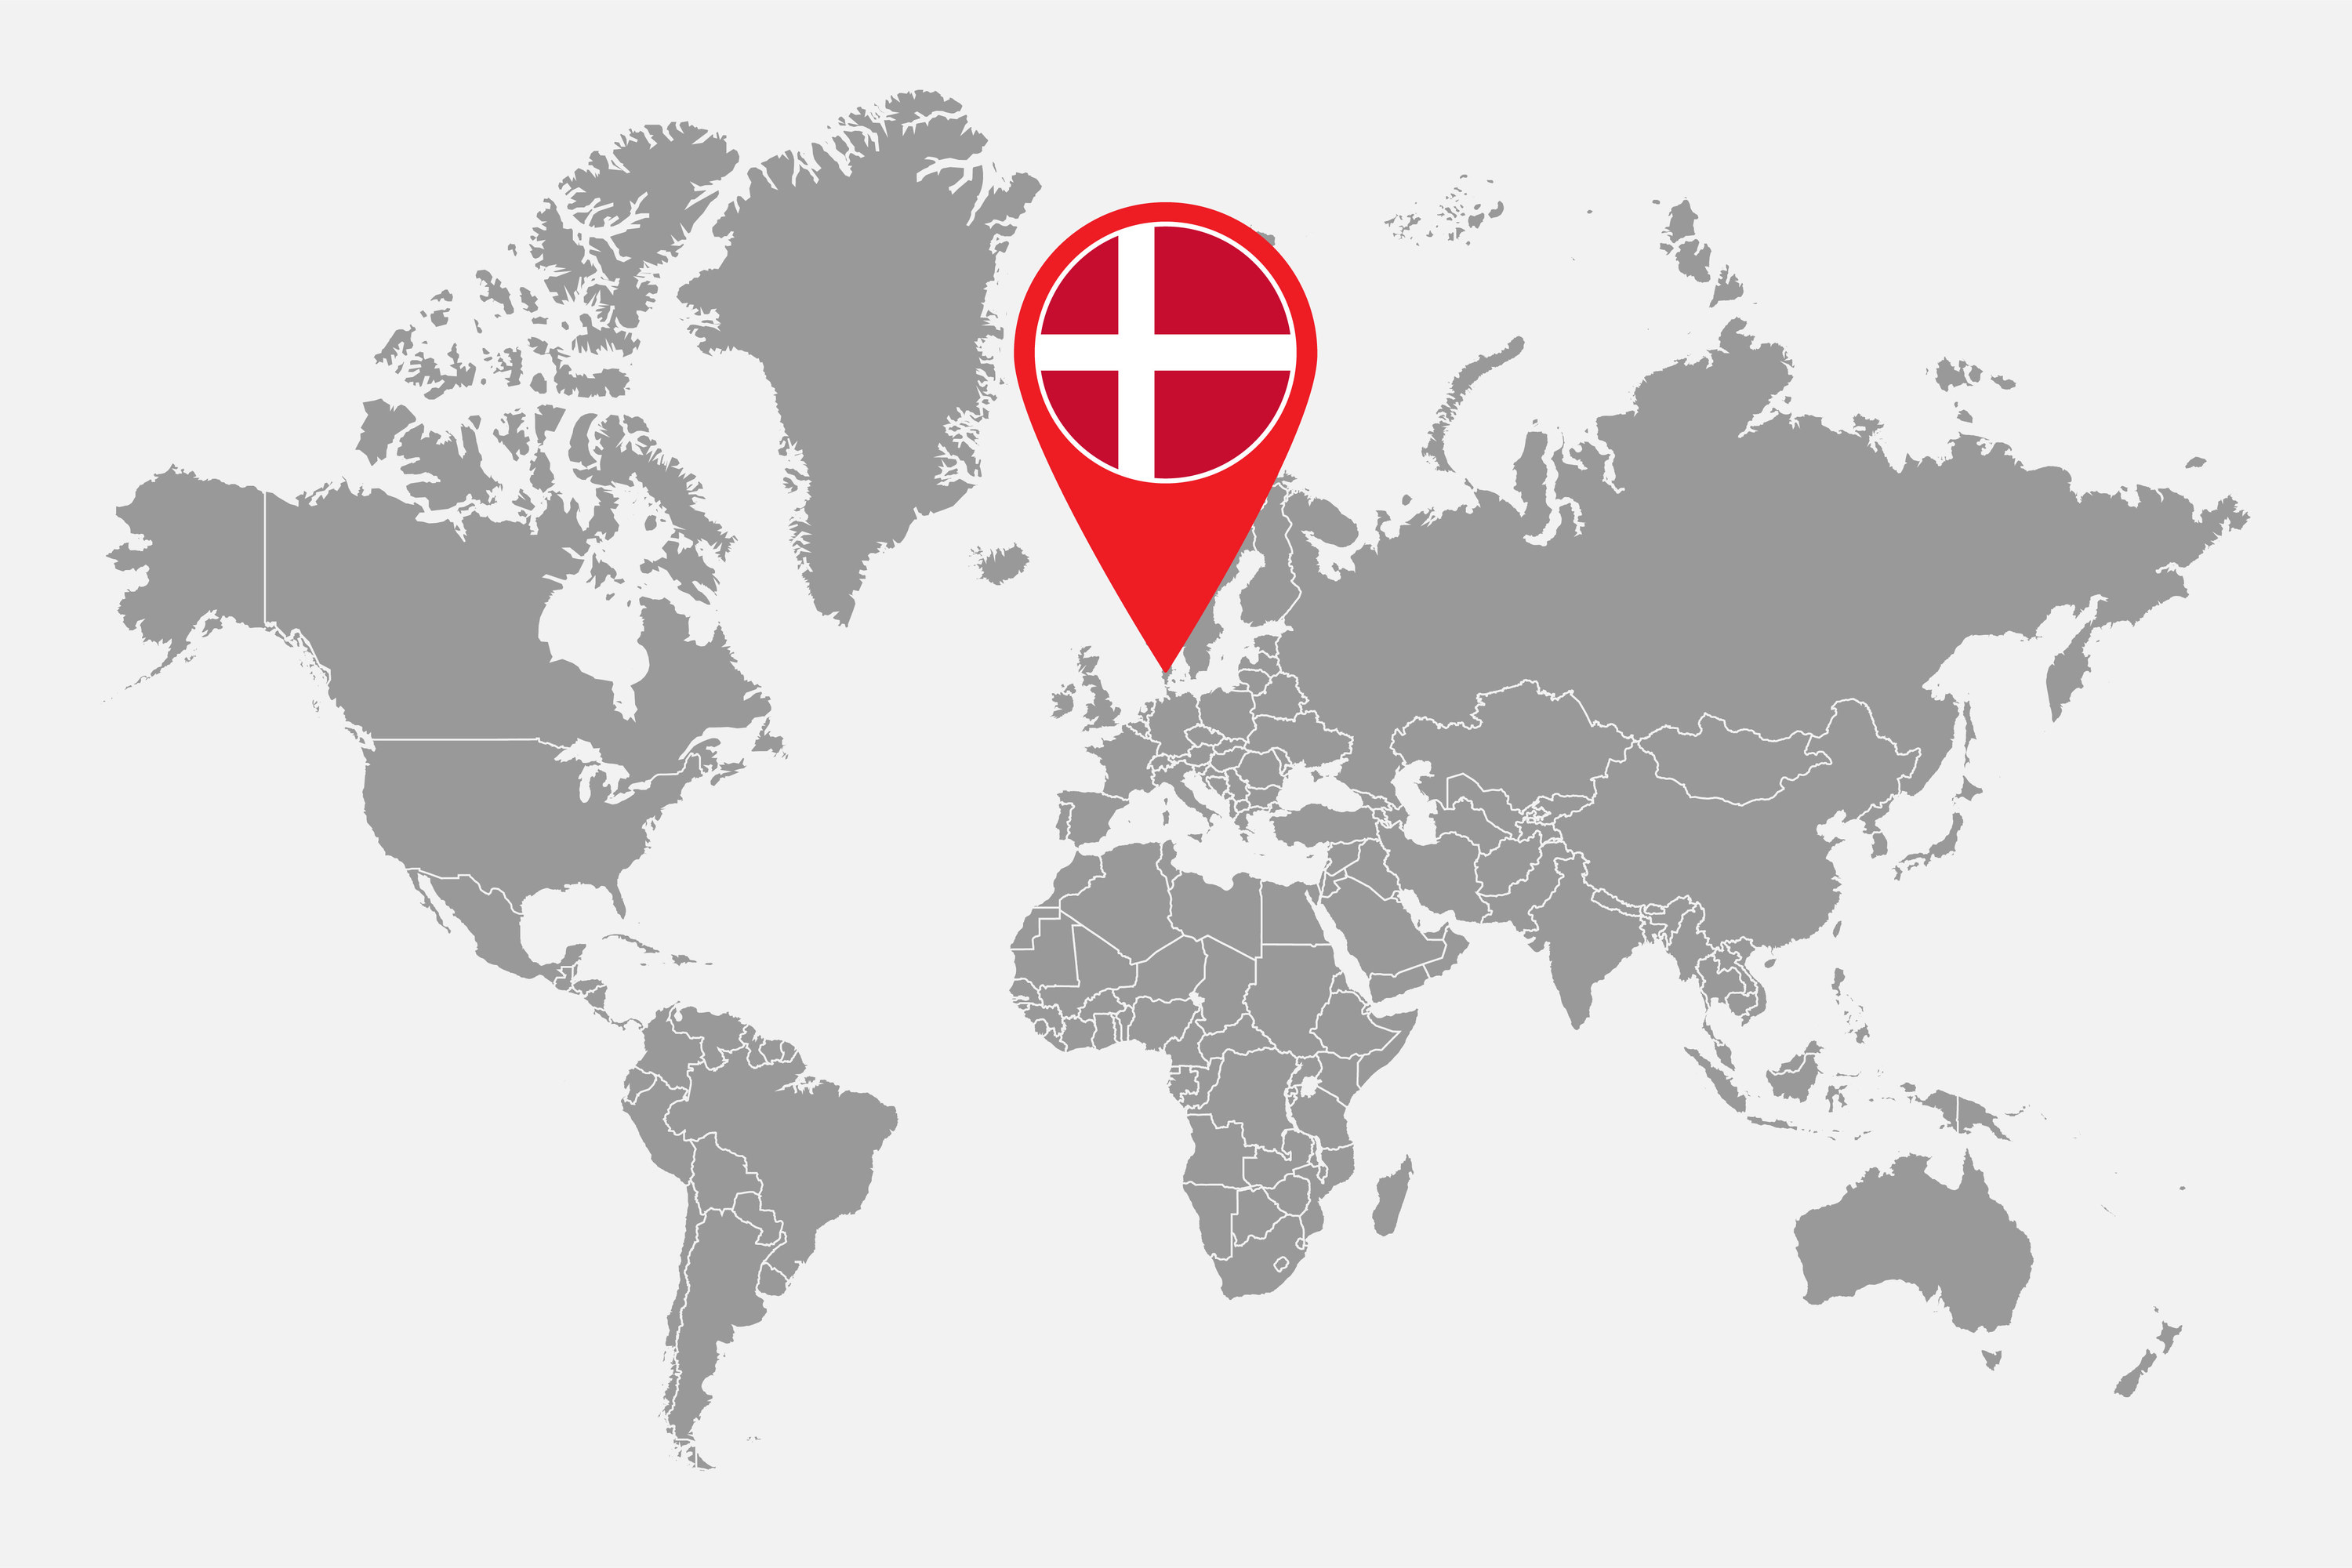 A world map with Denmark indicated